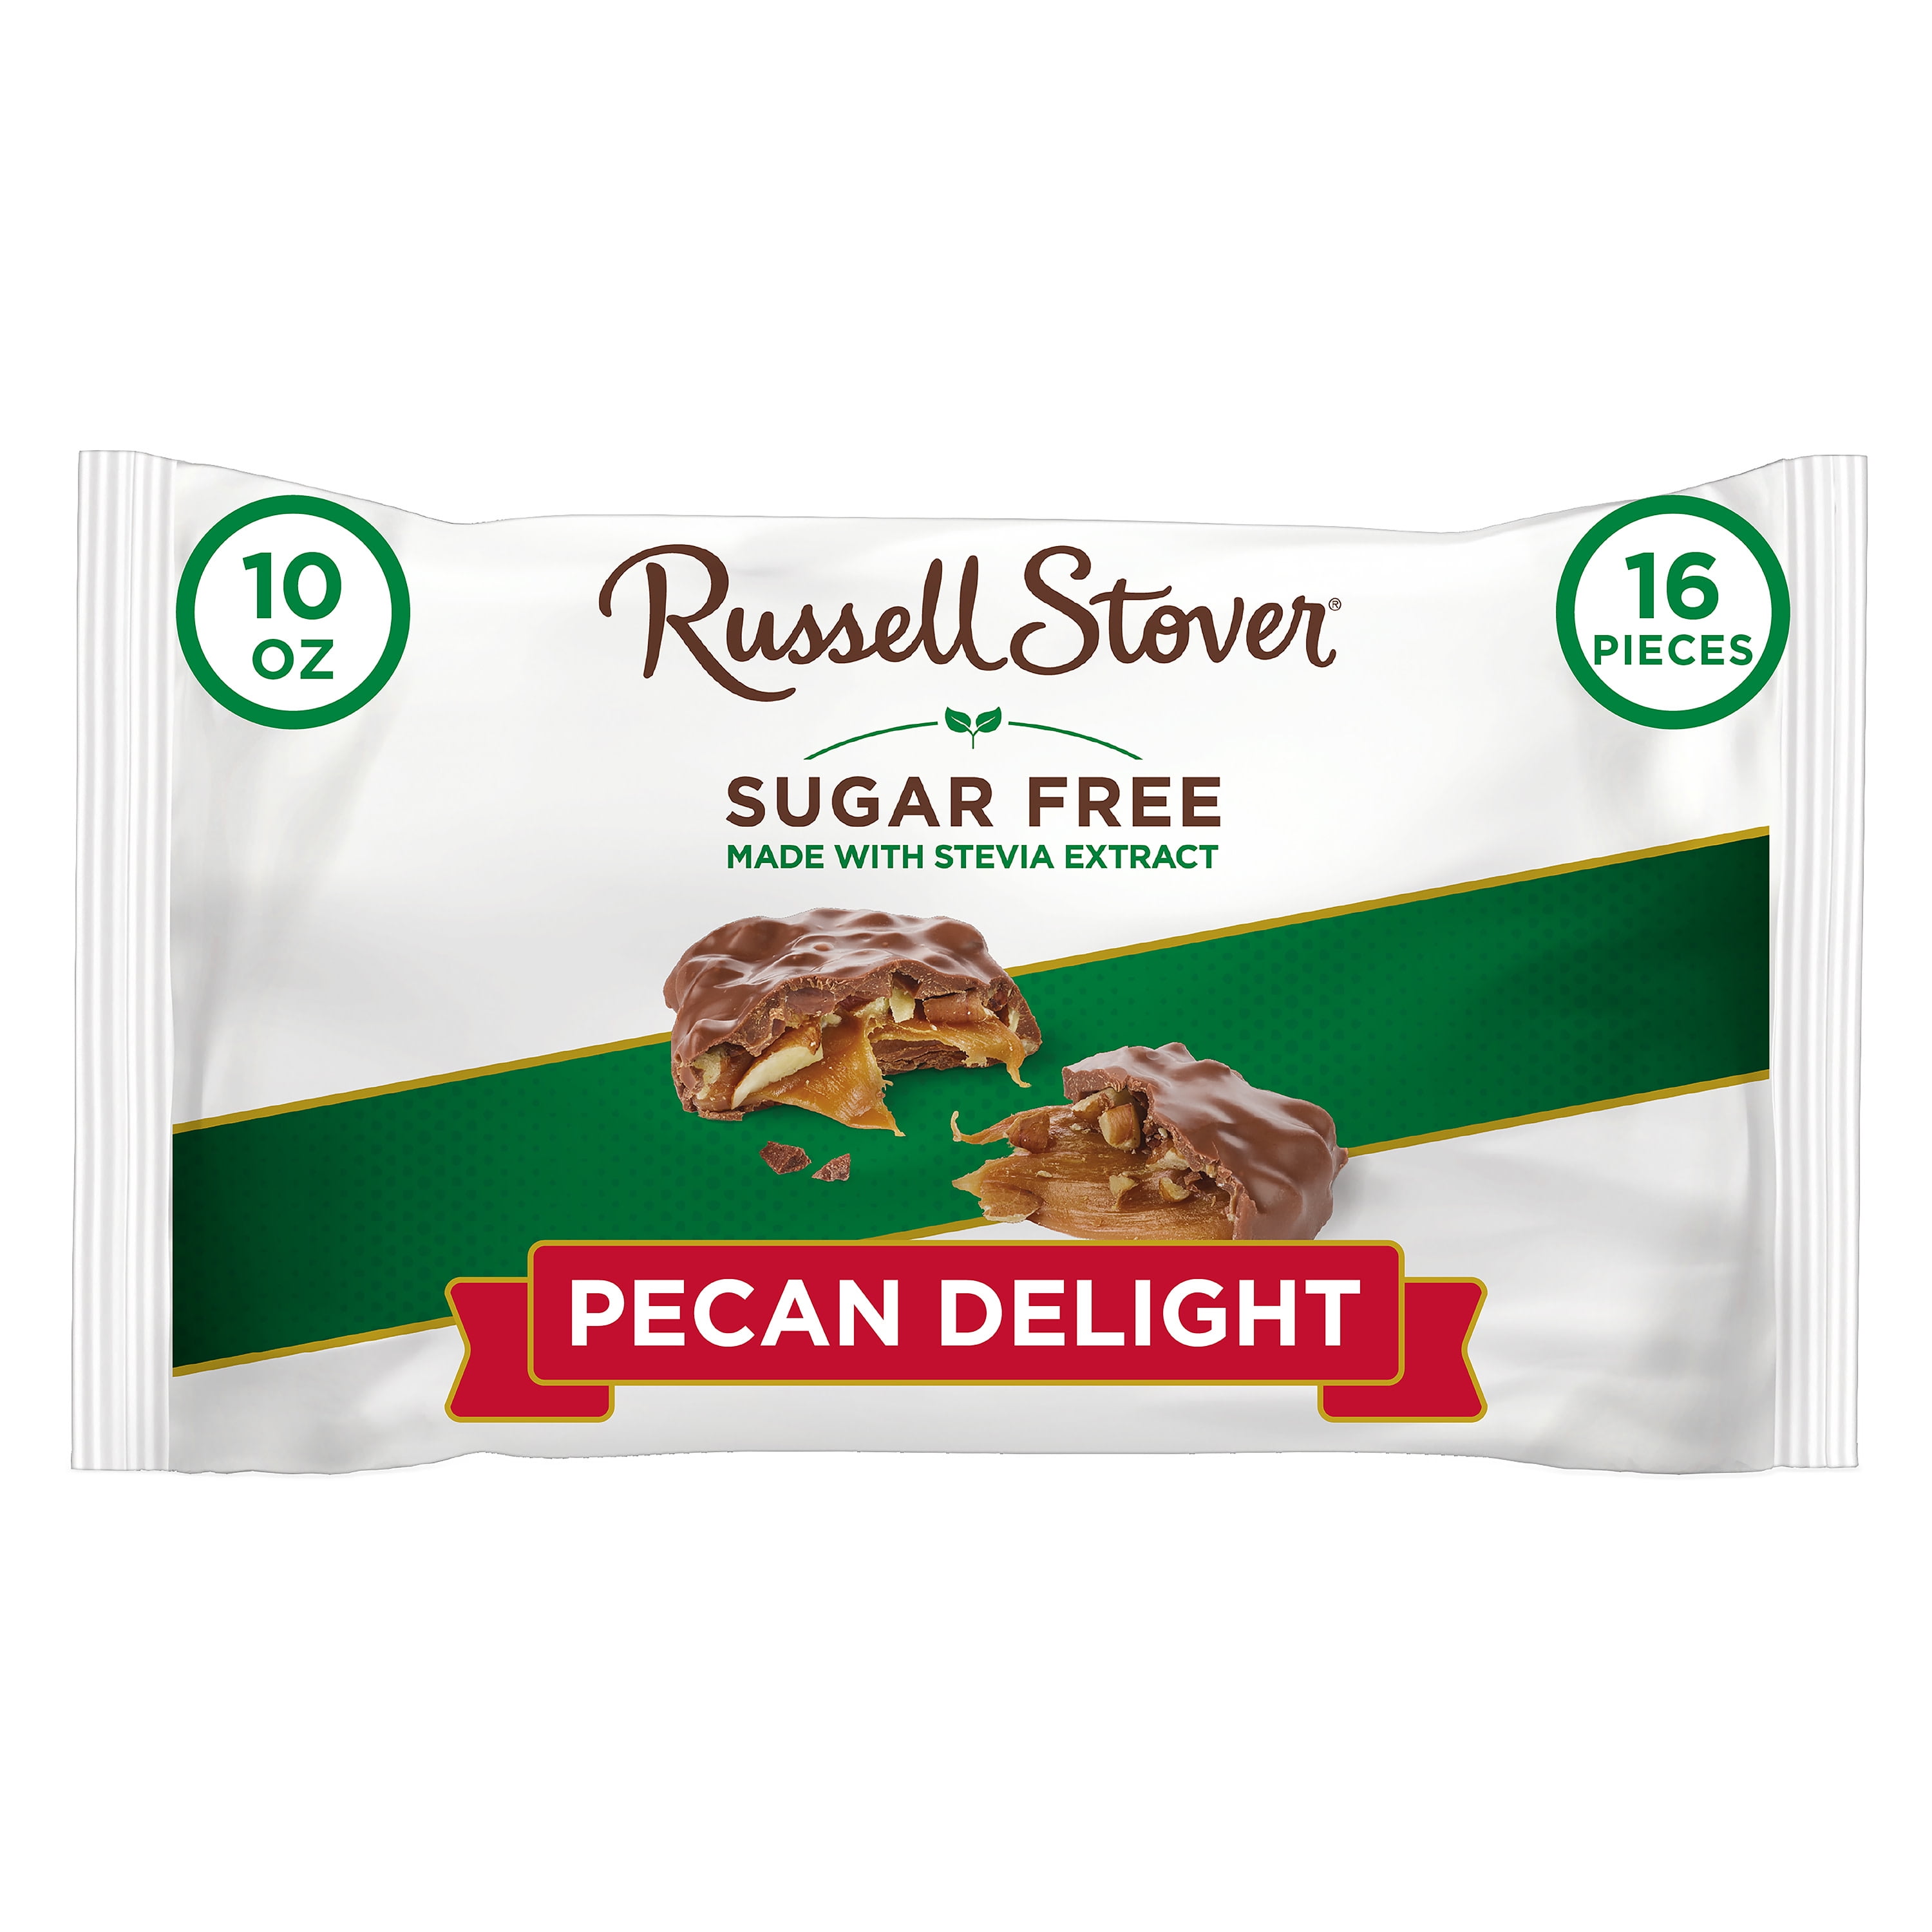 Russell Stover Sugar Free Pecan Delights Chocolate Candy with Stevia, 10 oz. Bag